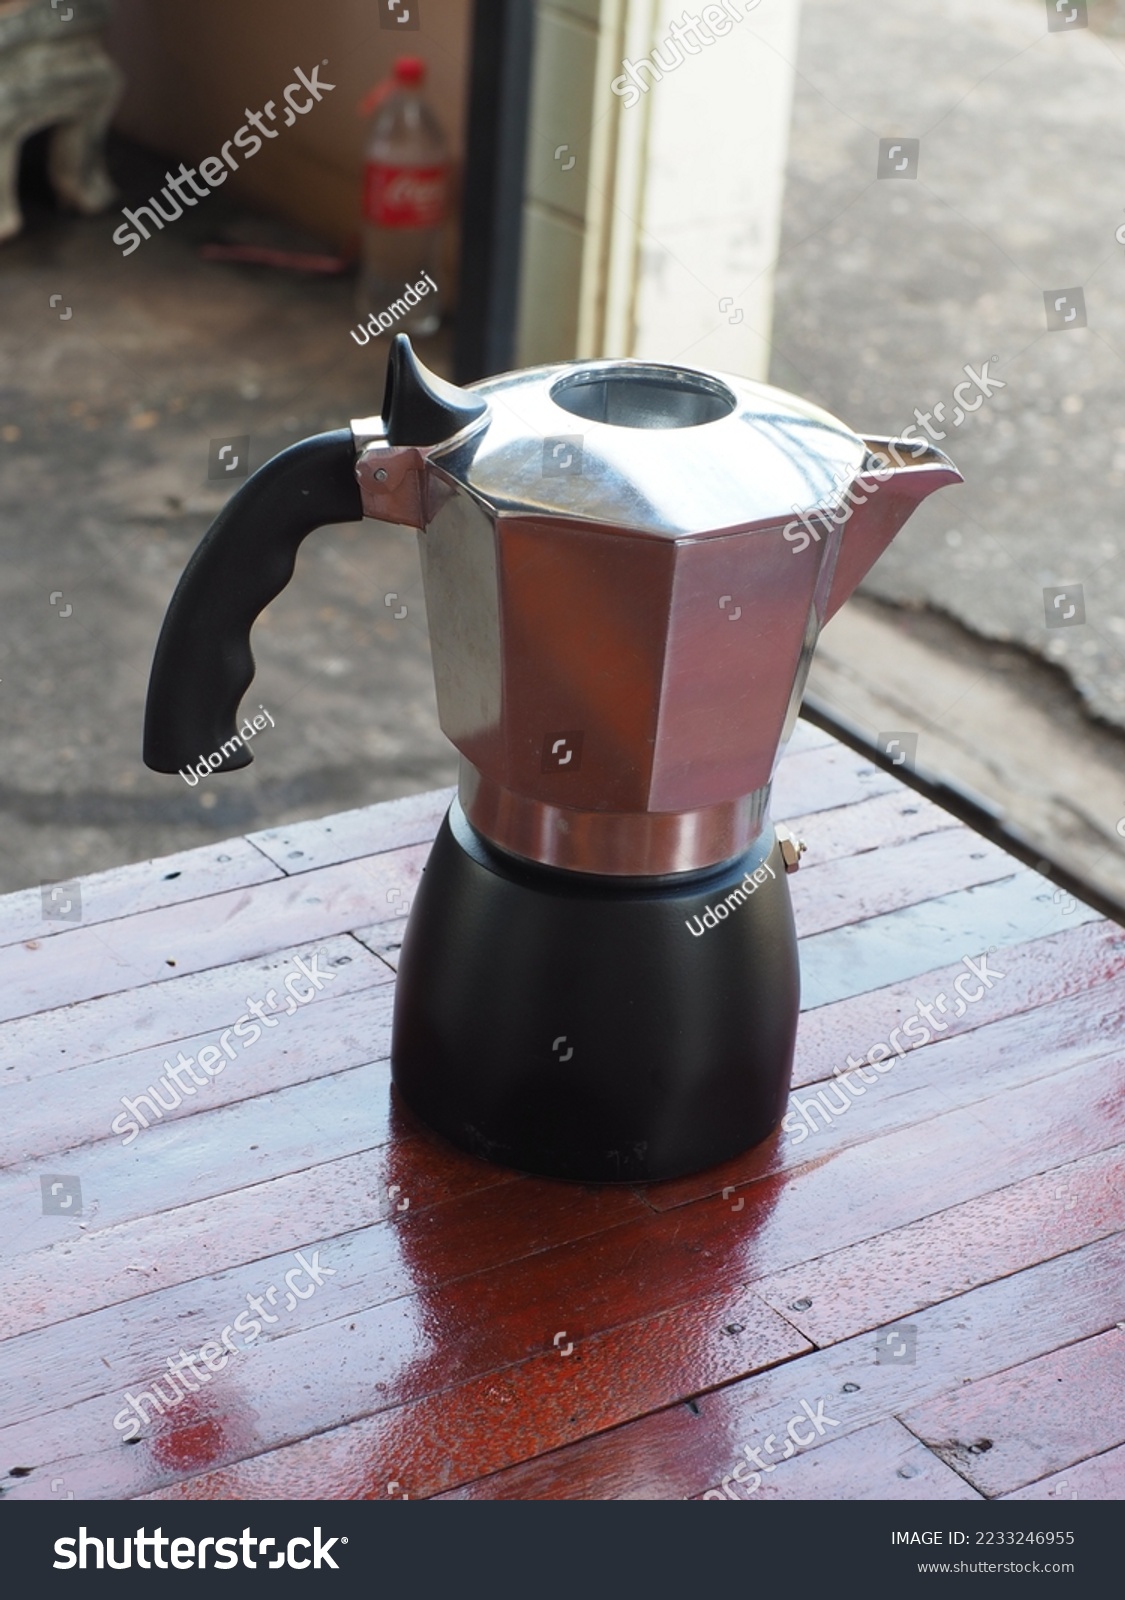 Small pressure coffee pot, Moka Pot, made of aluminum material, placed on a dark wooden floor table.  Ready to solve the stainless steel measure  The photo presents a shallow depth of field. #2233246955